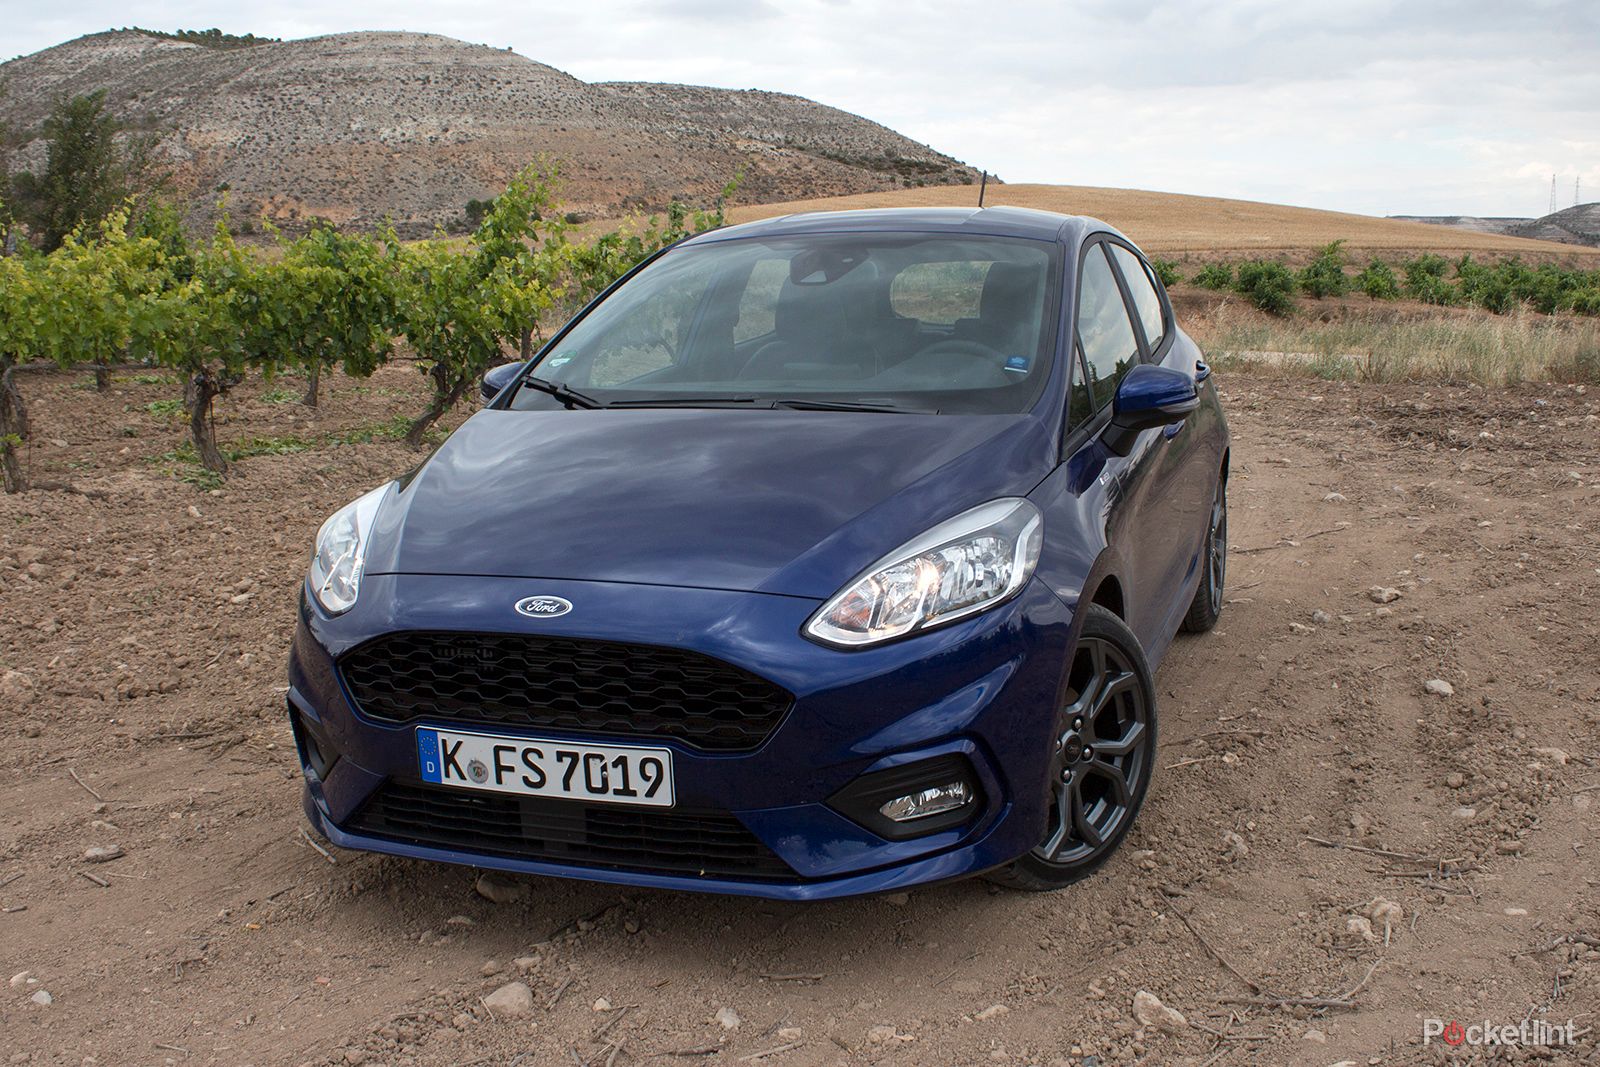 Ford Fiesta (2017) review: The little car that's a very big deal